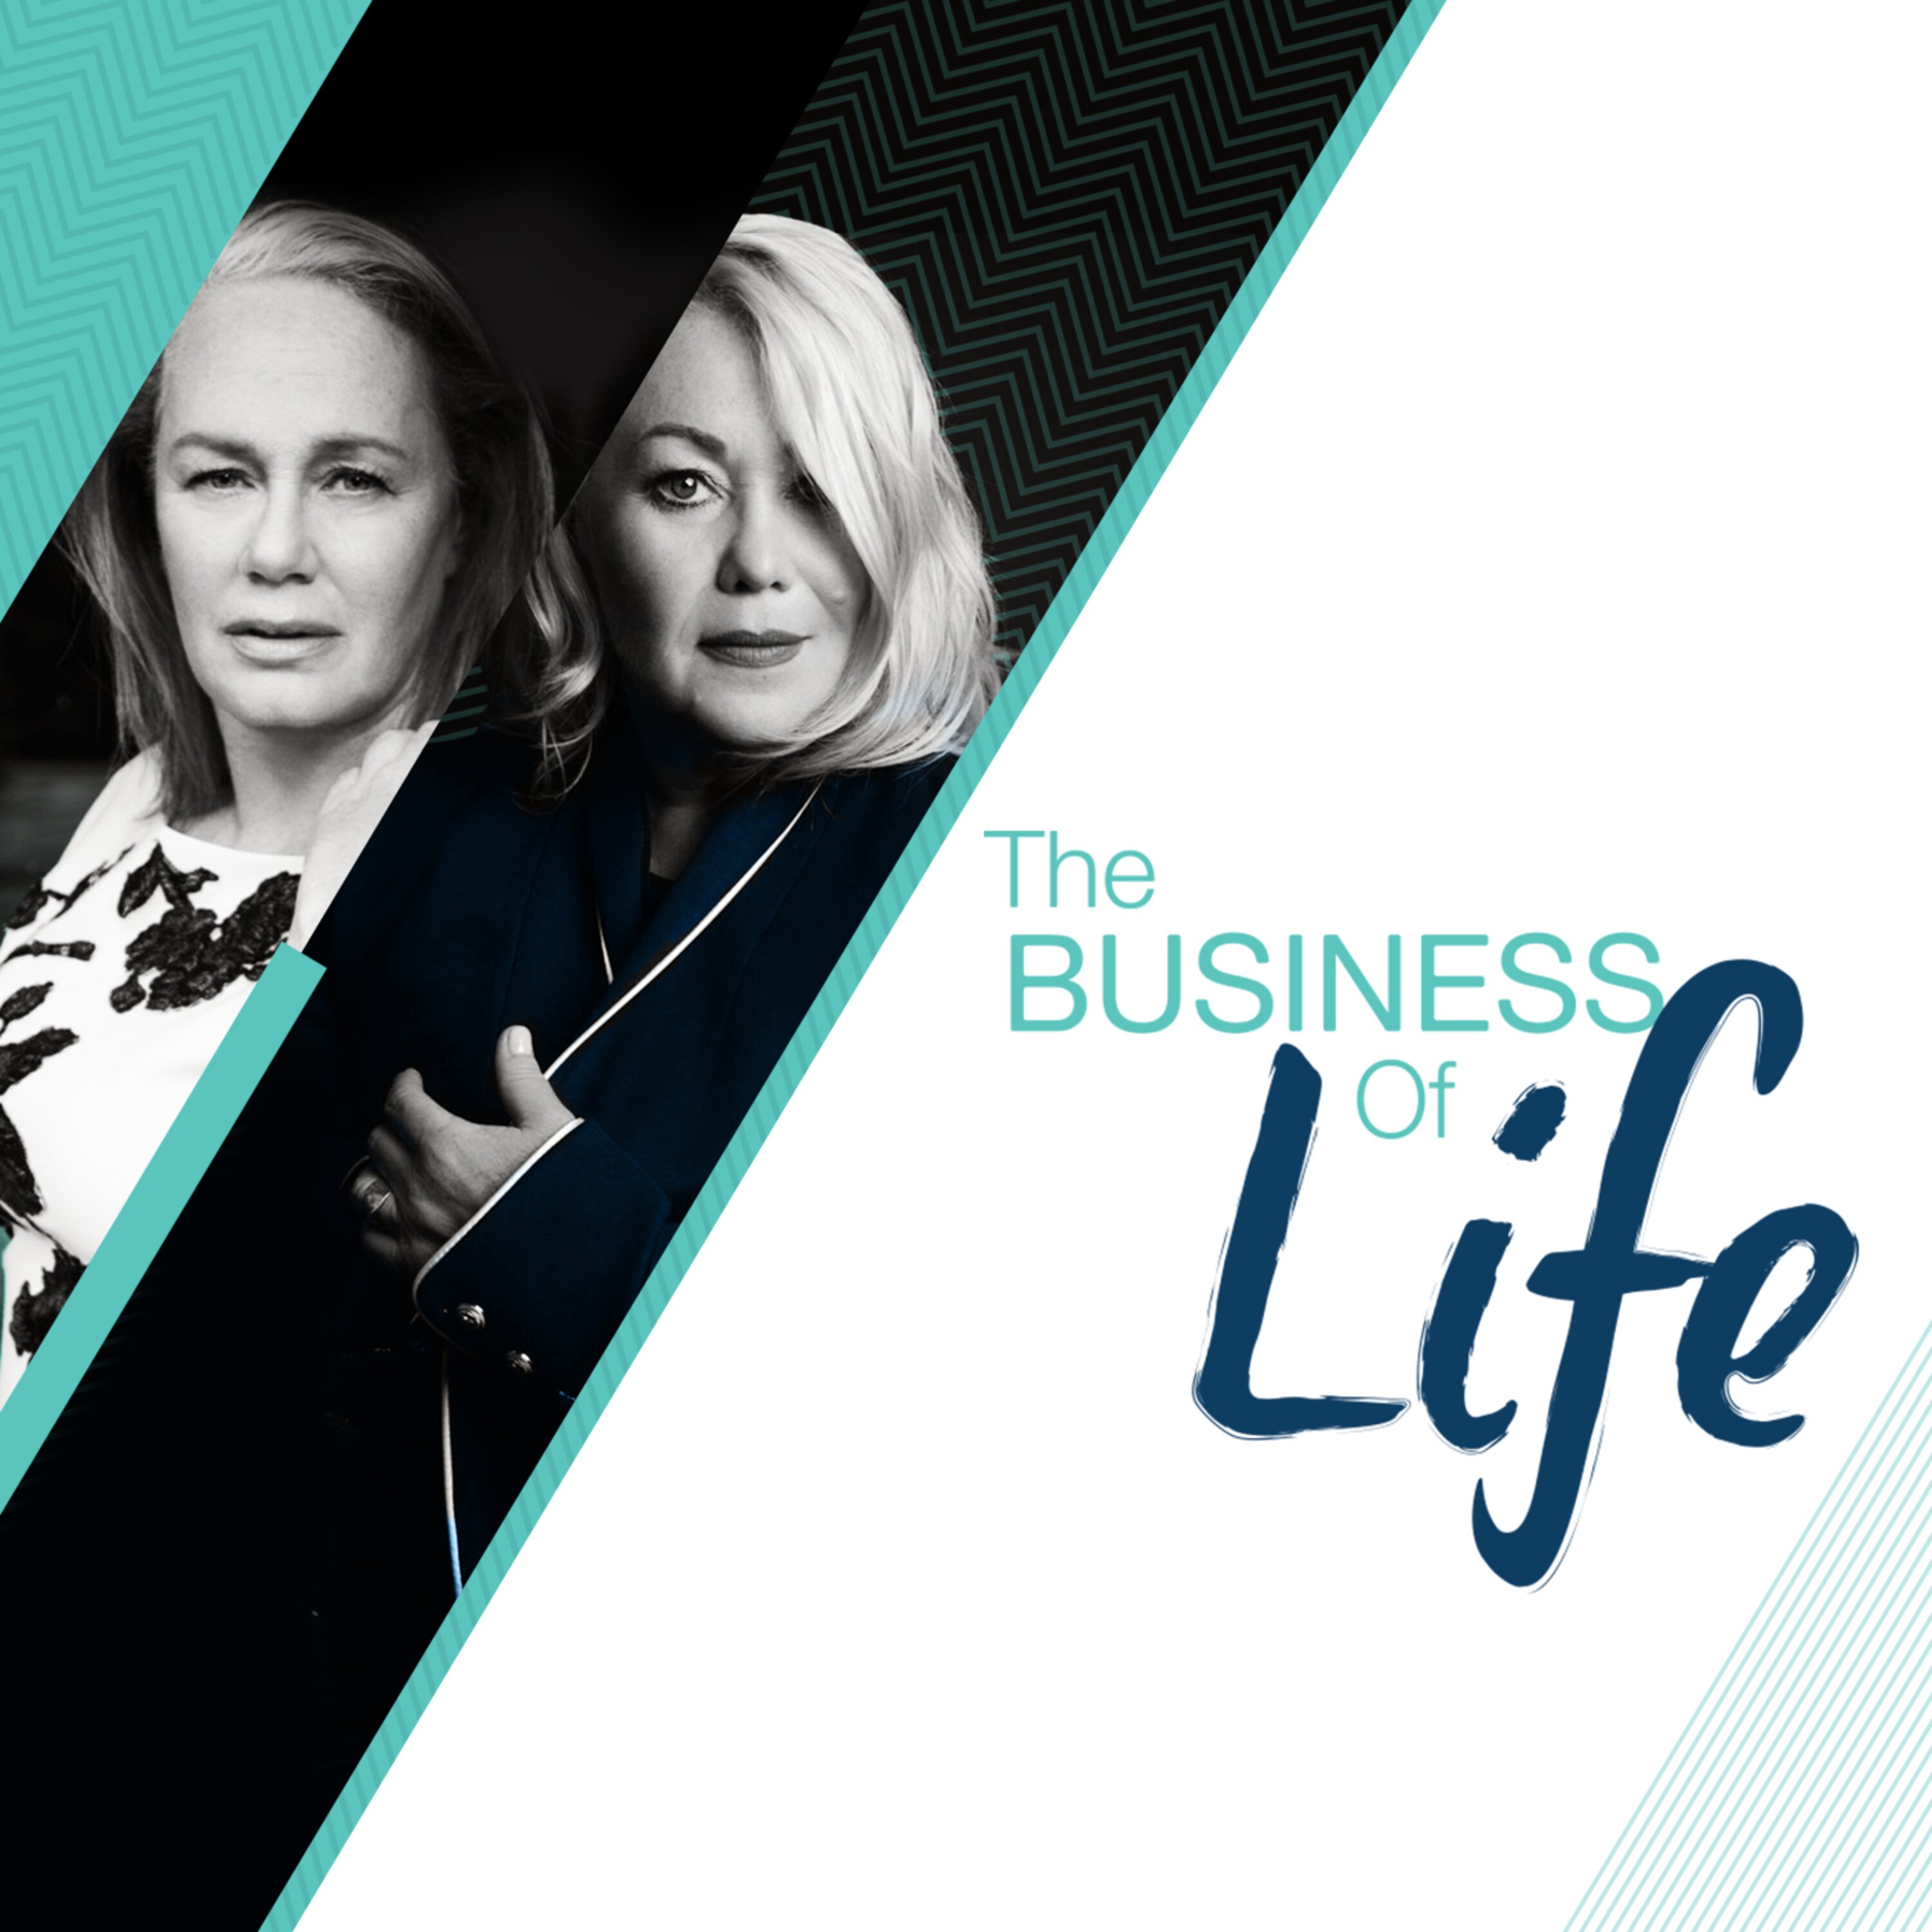 The Business of Life podcast show image